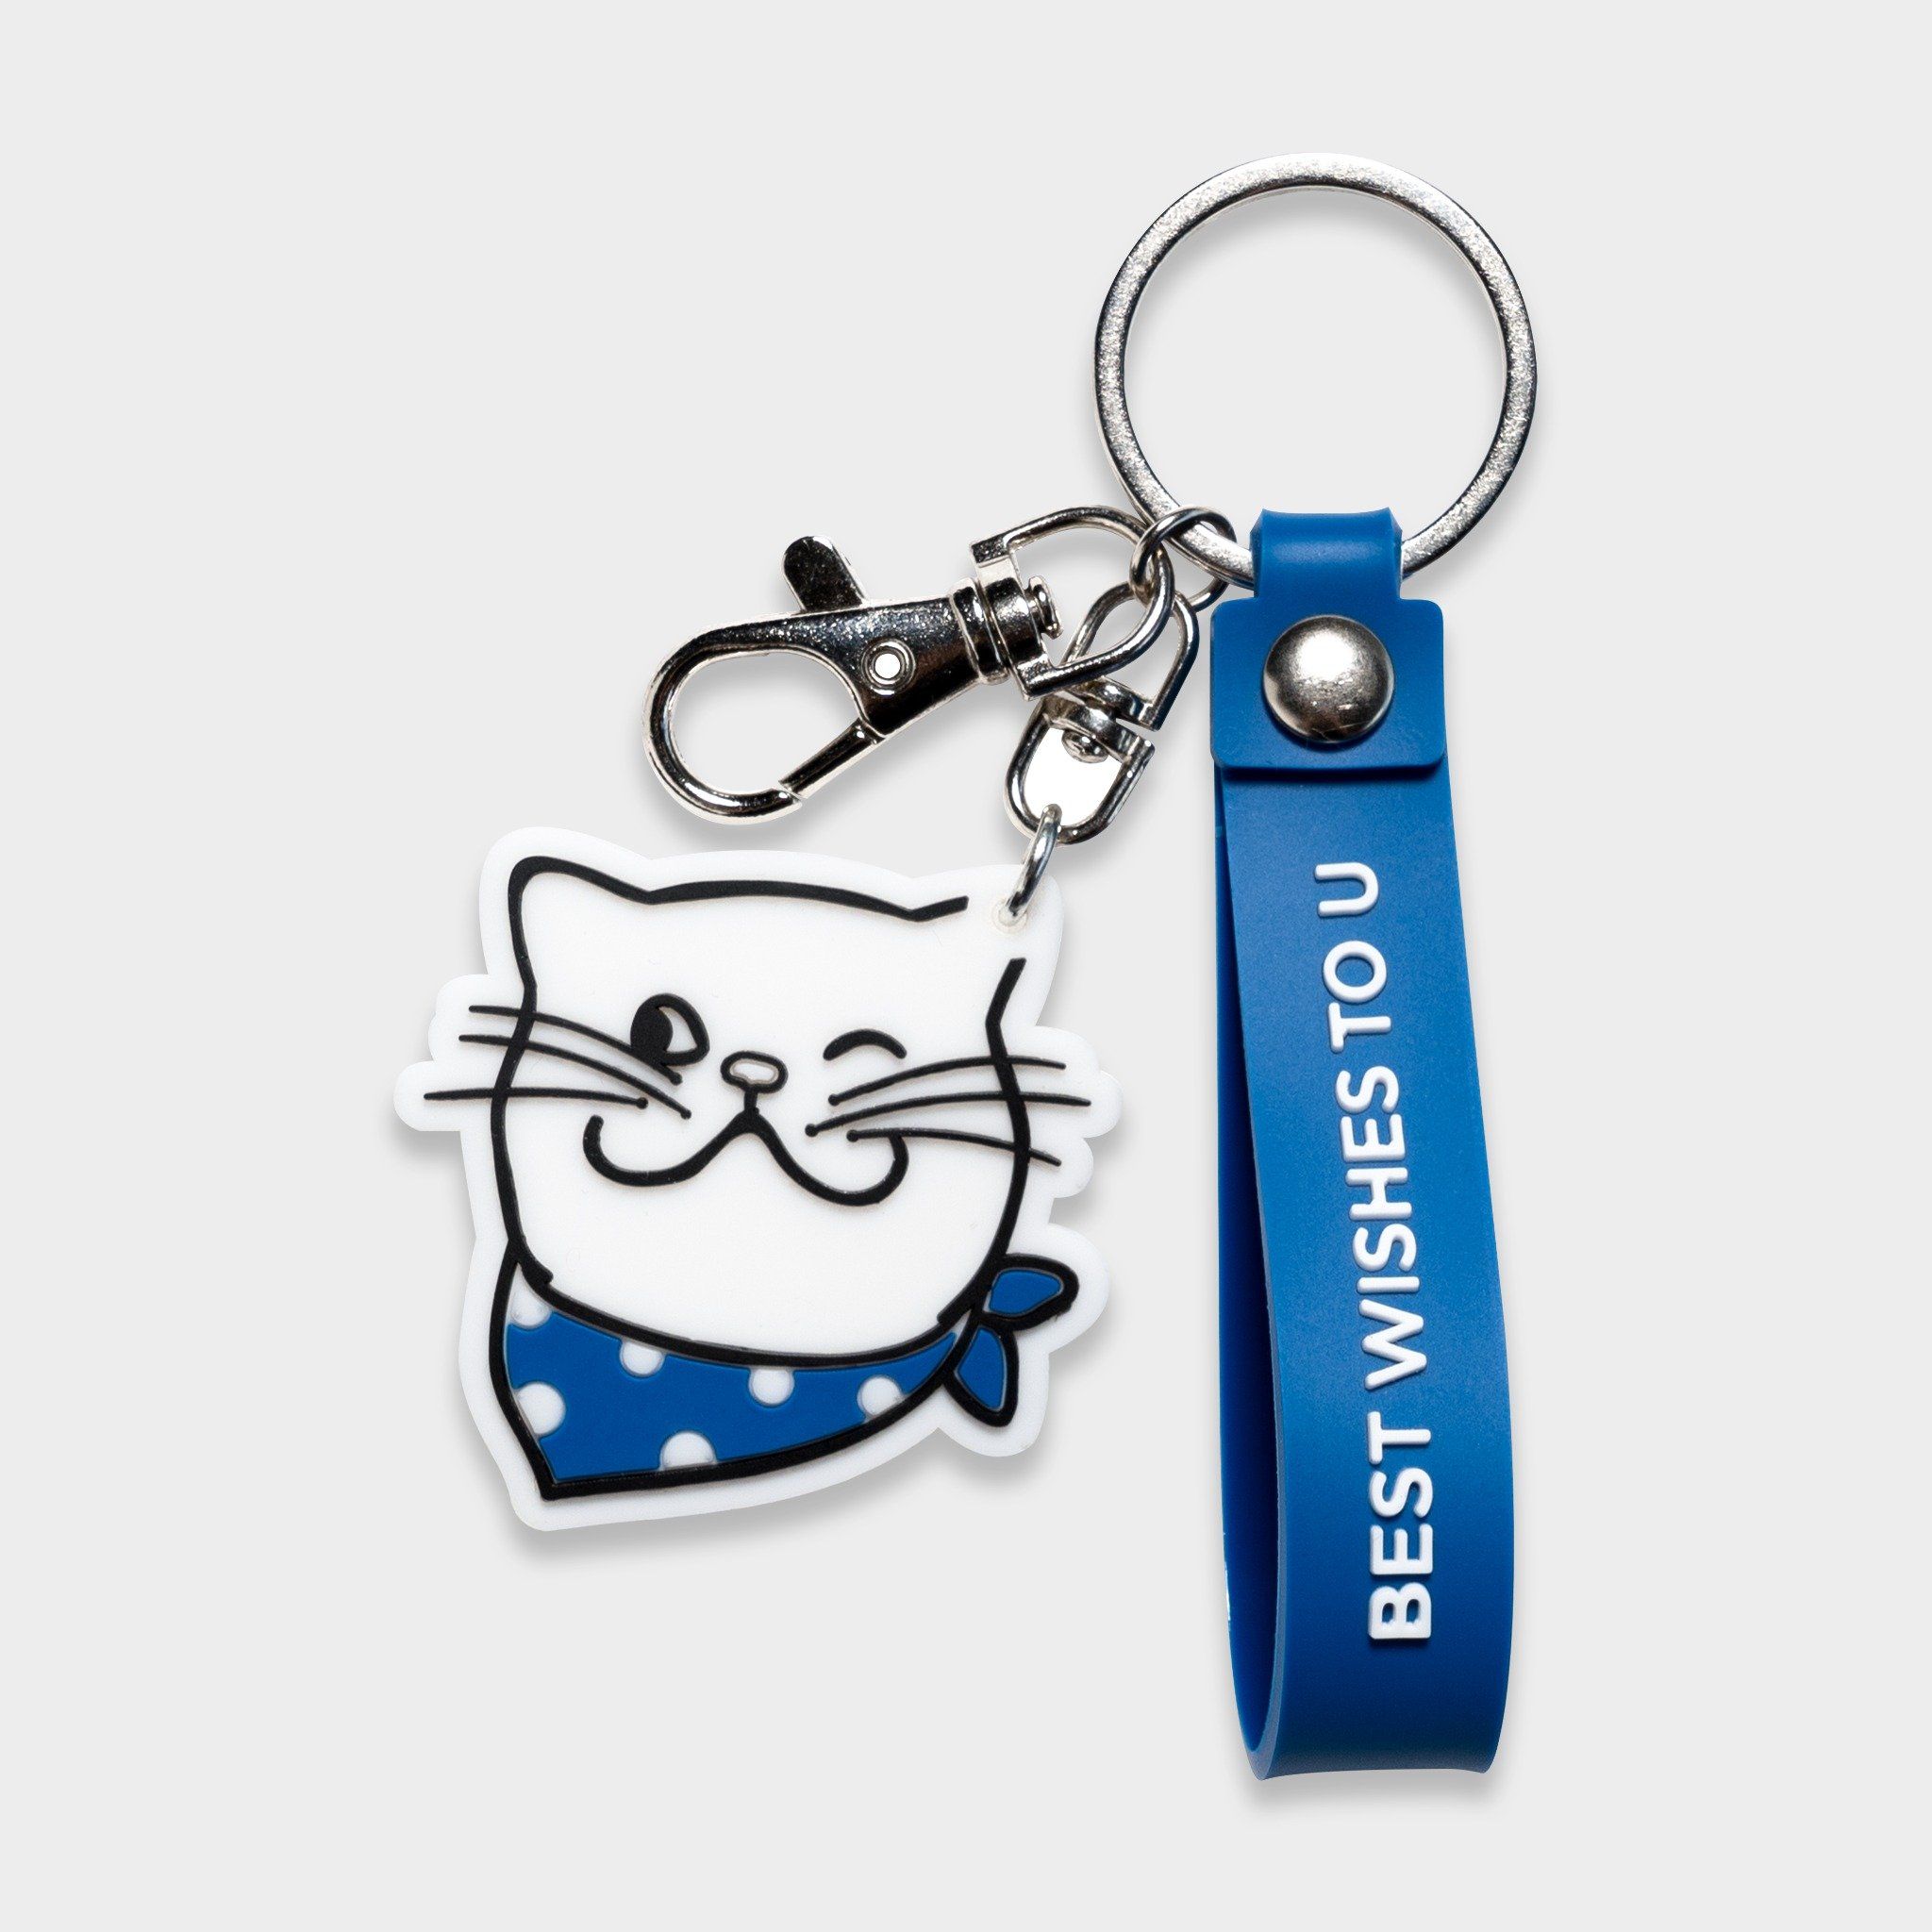  Keychain Oute x Meow - Meow Colletion 